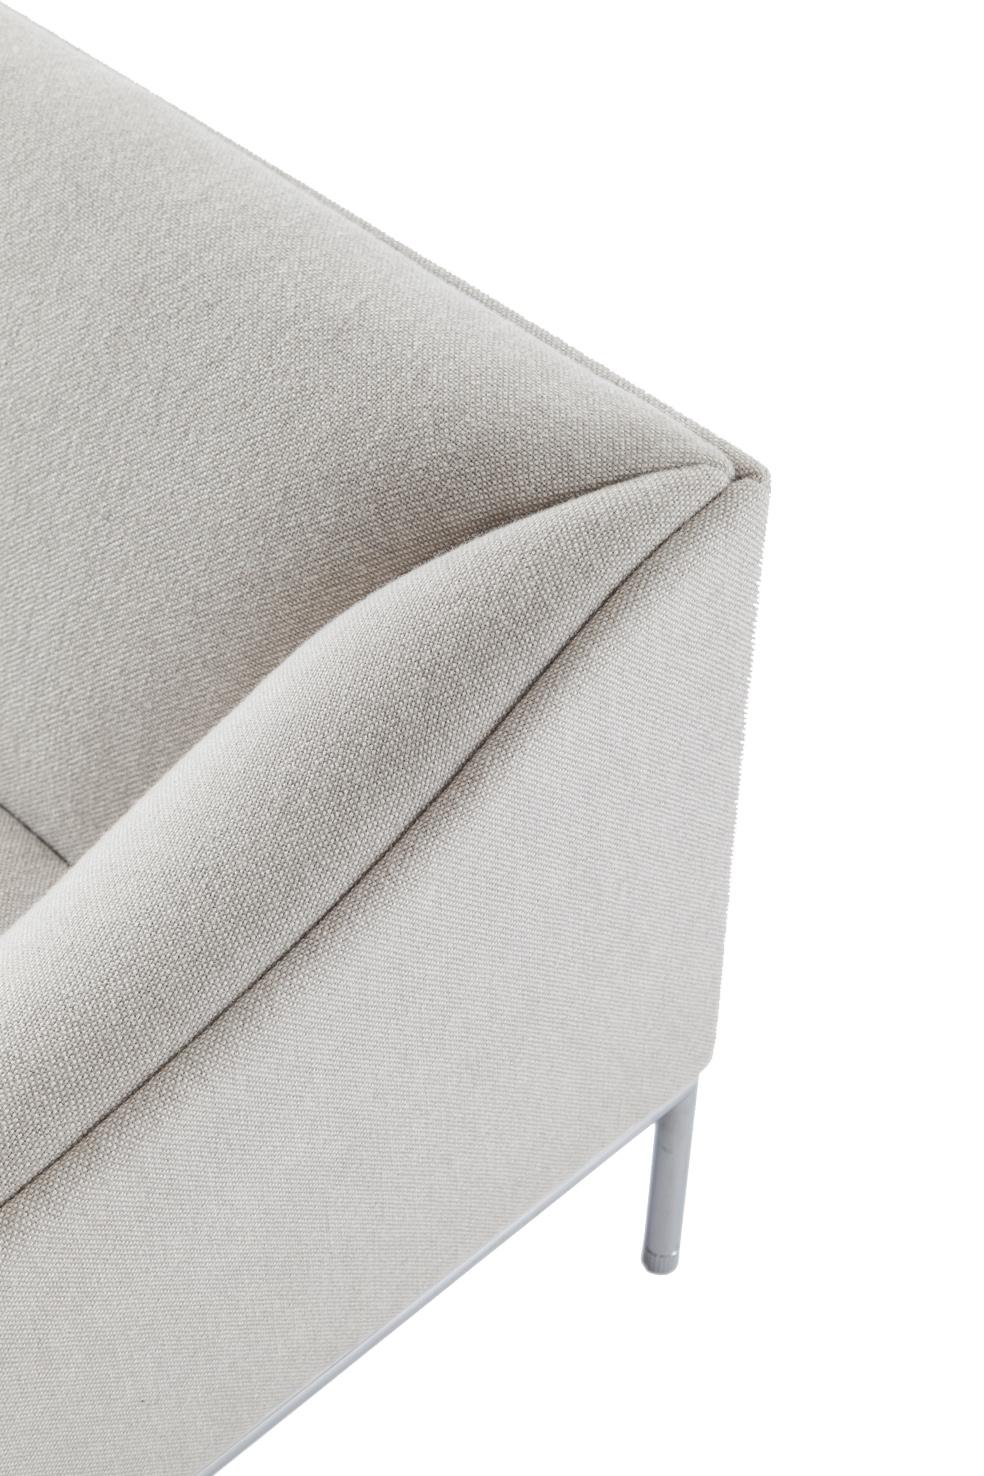 Beige (Hero - 800) Cappellini High Time Two-Seat Sofa in Fabric or Leather by Christophe Pillet 3